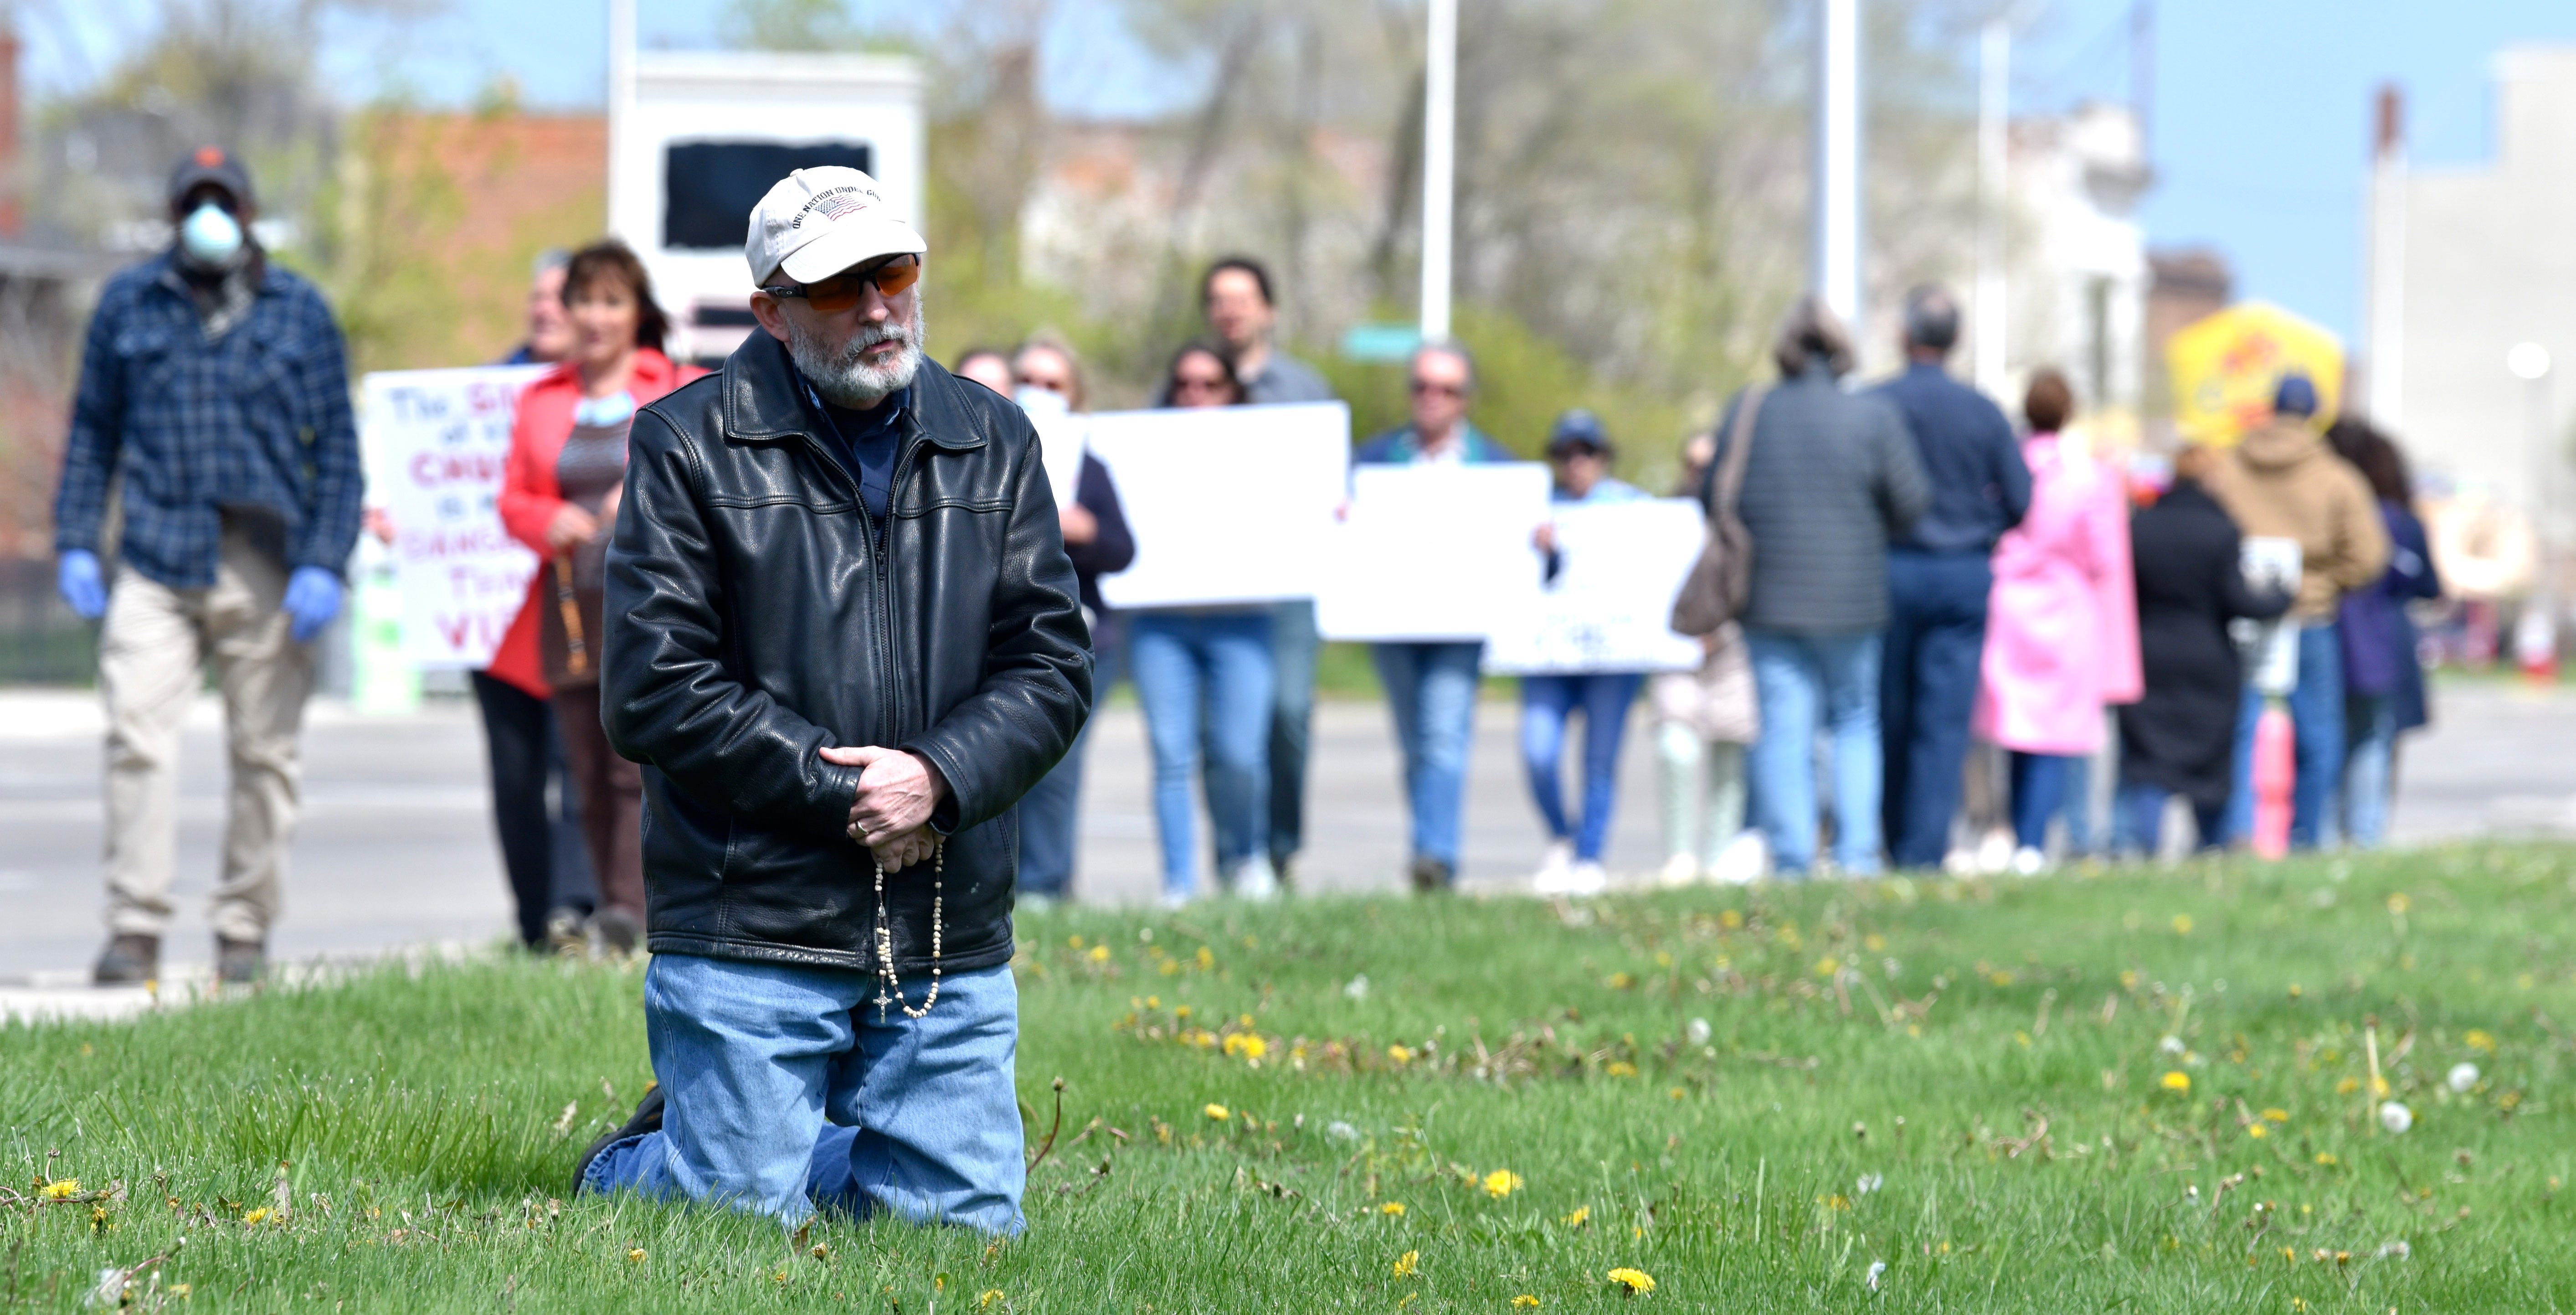 Barry Doherty, of Ortonville, kneels as he Prays the Rosary as more than 50 believers gather in front of the Cathedral of the Most Blessed Sacrament on Woodward Ave. in Detroit, Thursday morning, May 7, 2020, to demand that Arch Bishop Allen Vigneron reopen Catholic churches that have been closed since March because of COVID-19.